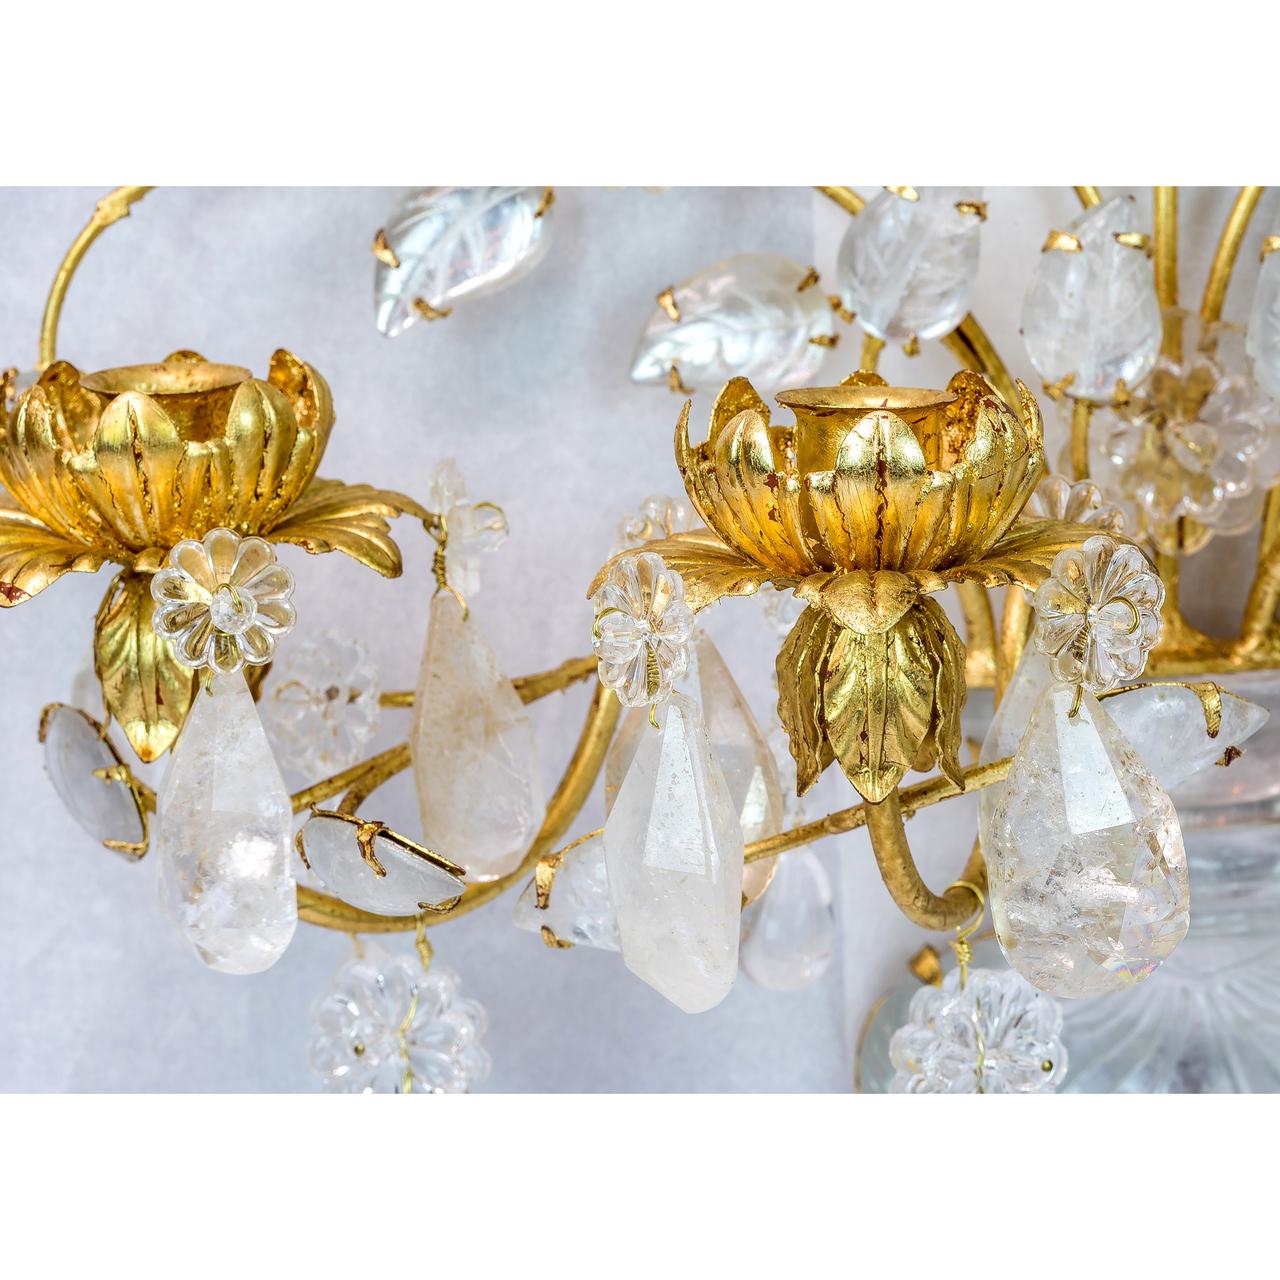 French Neoclassical Four-Light Gilt Bronze Rock Crystal Sconces Baguès Attributed, Pair